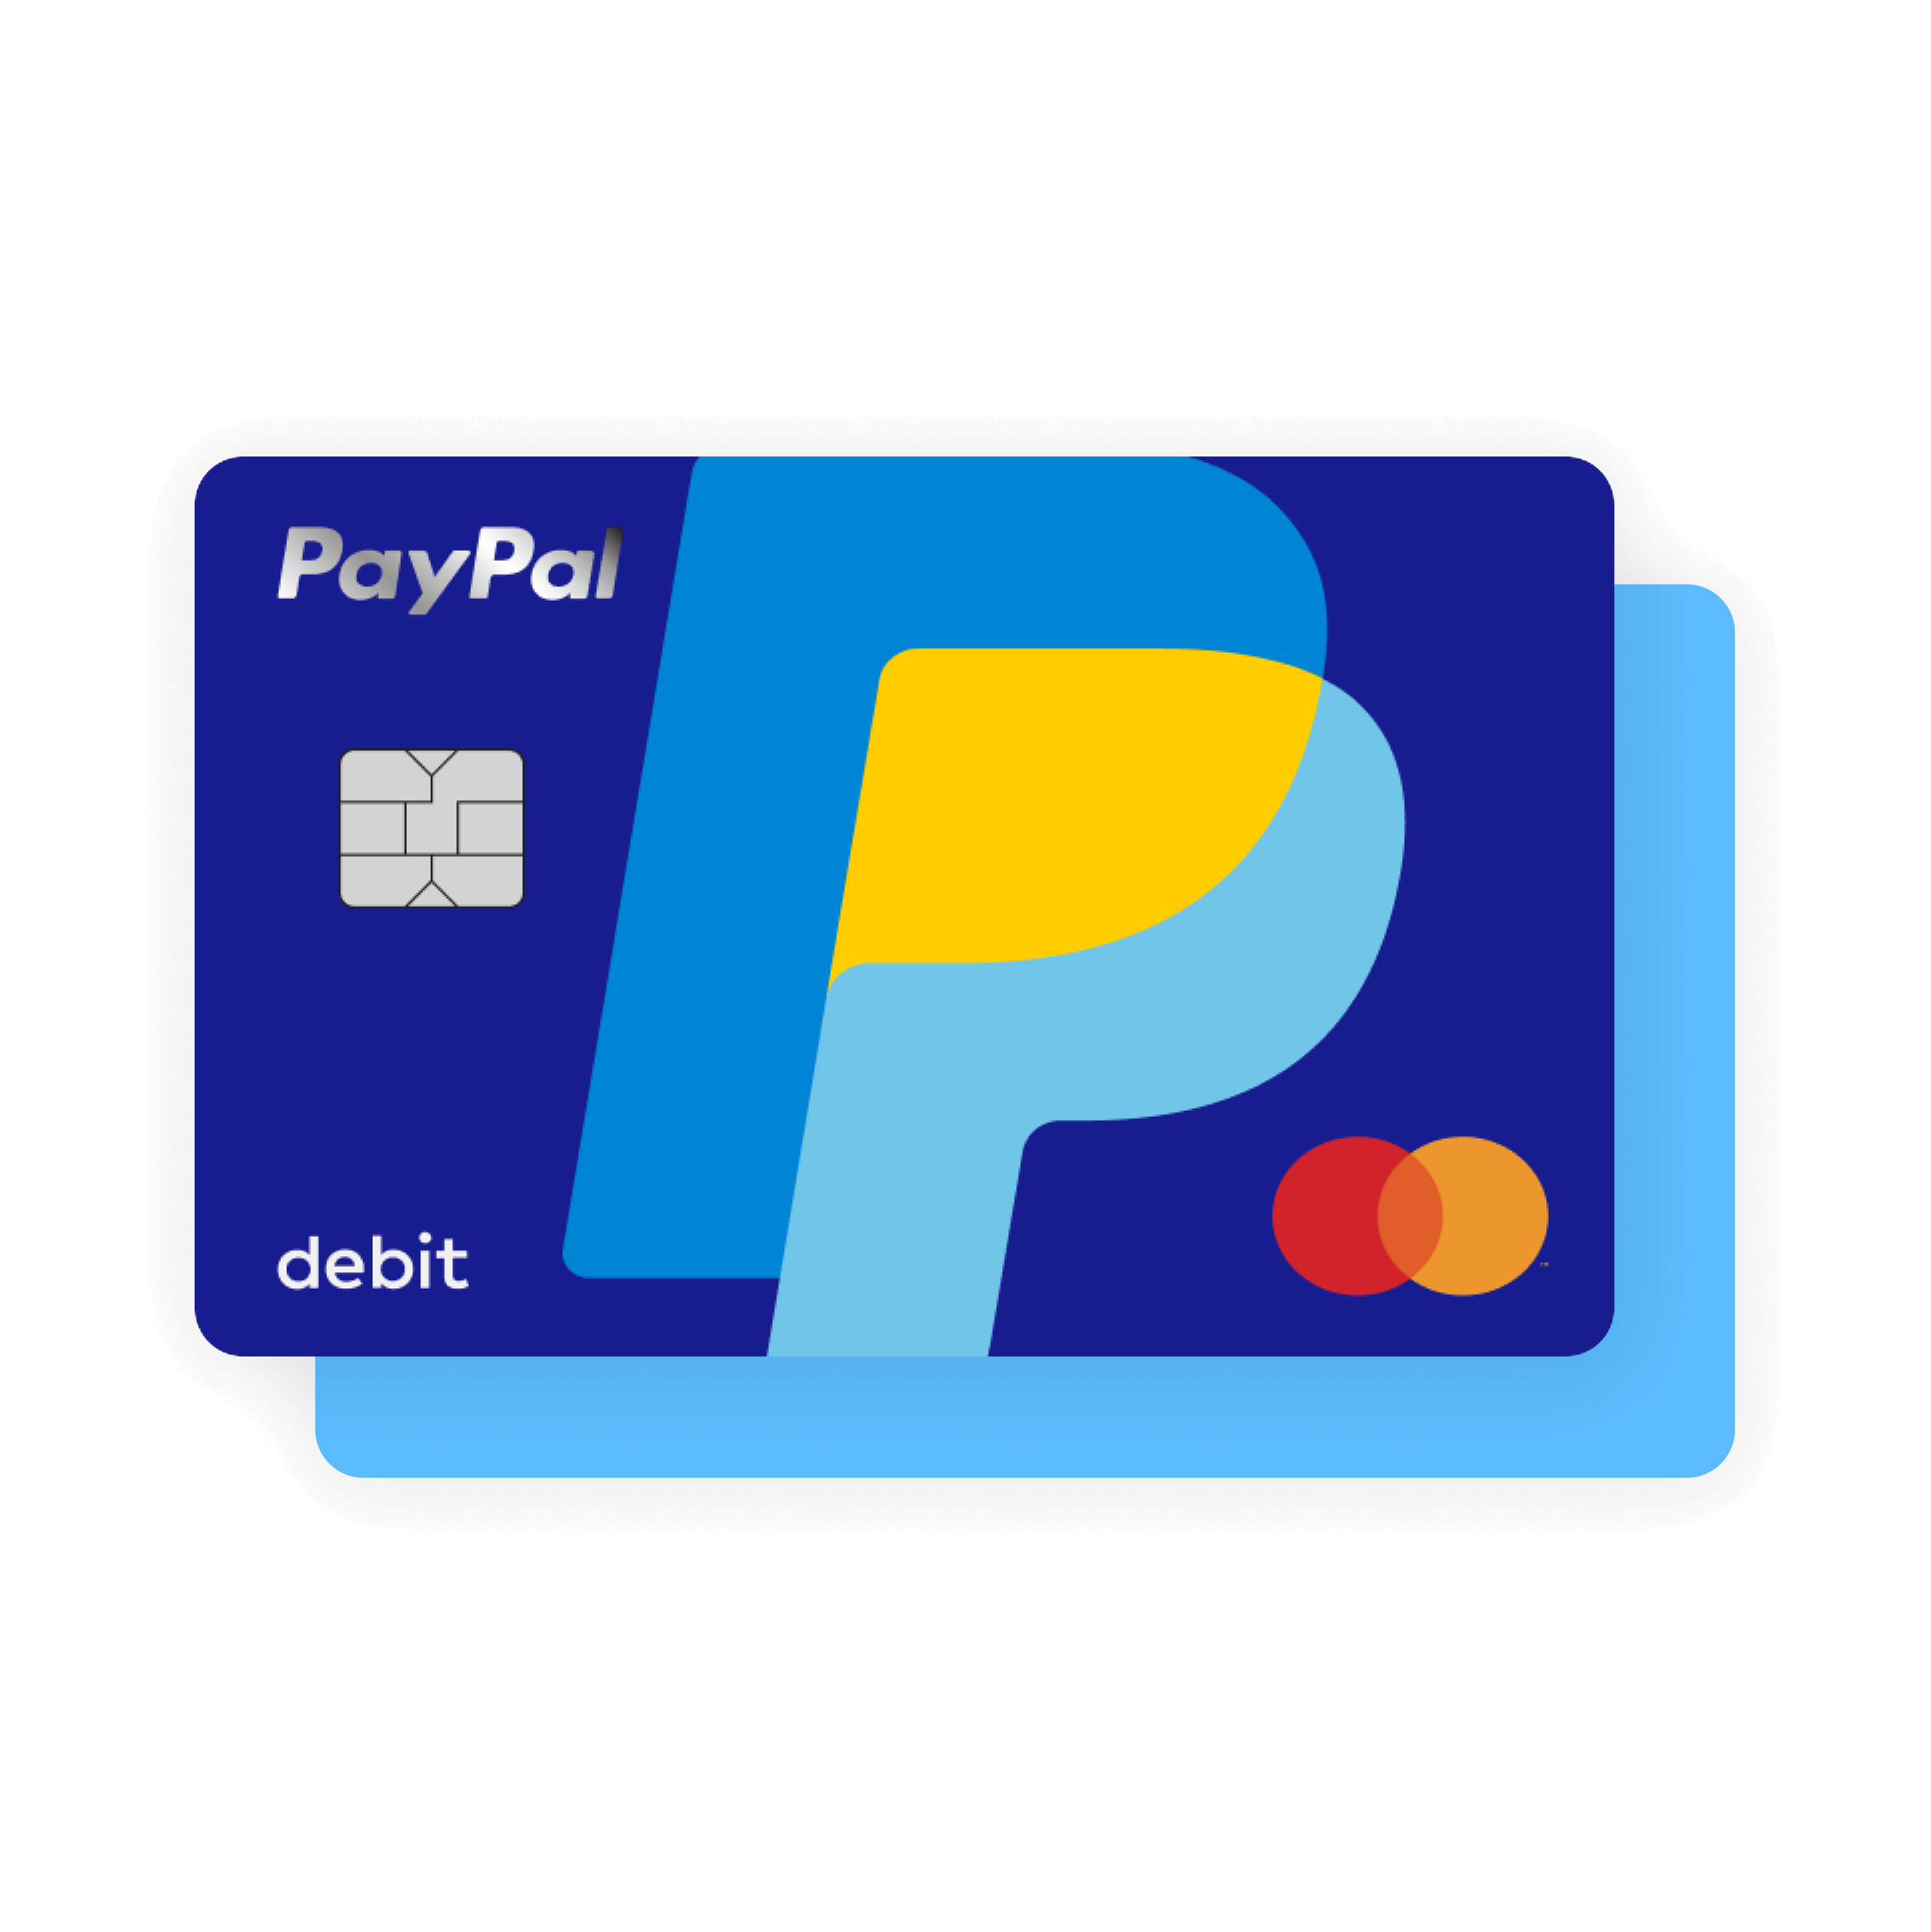 https://www.paypalobjects.com/marketing/web/US/en/rebrand/Shop-and-buy/Credit-and-cards/paypal-credit-and-cards-graphic-split-paypal-cash-card-ratio=1-1-for=all_V4.png